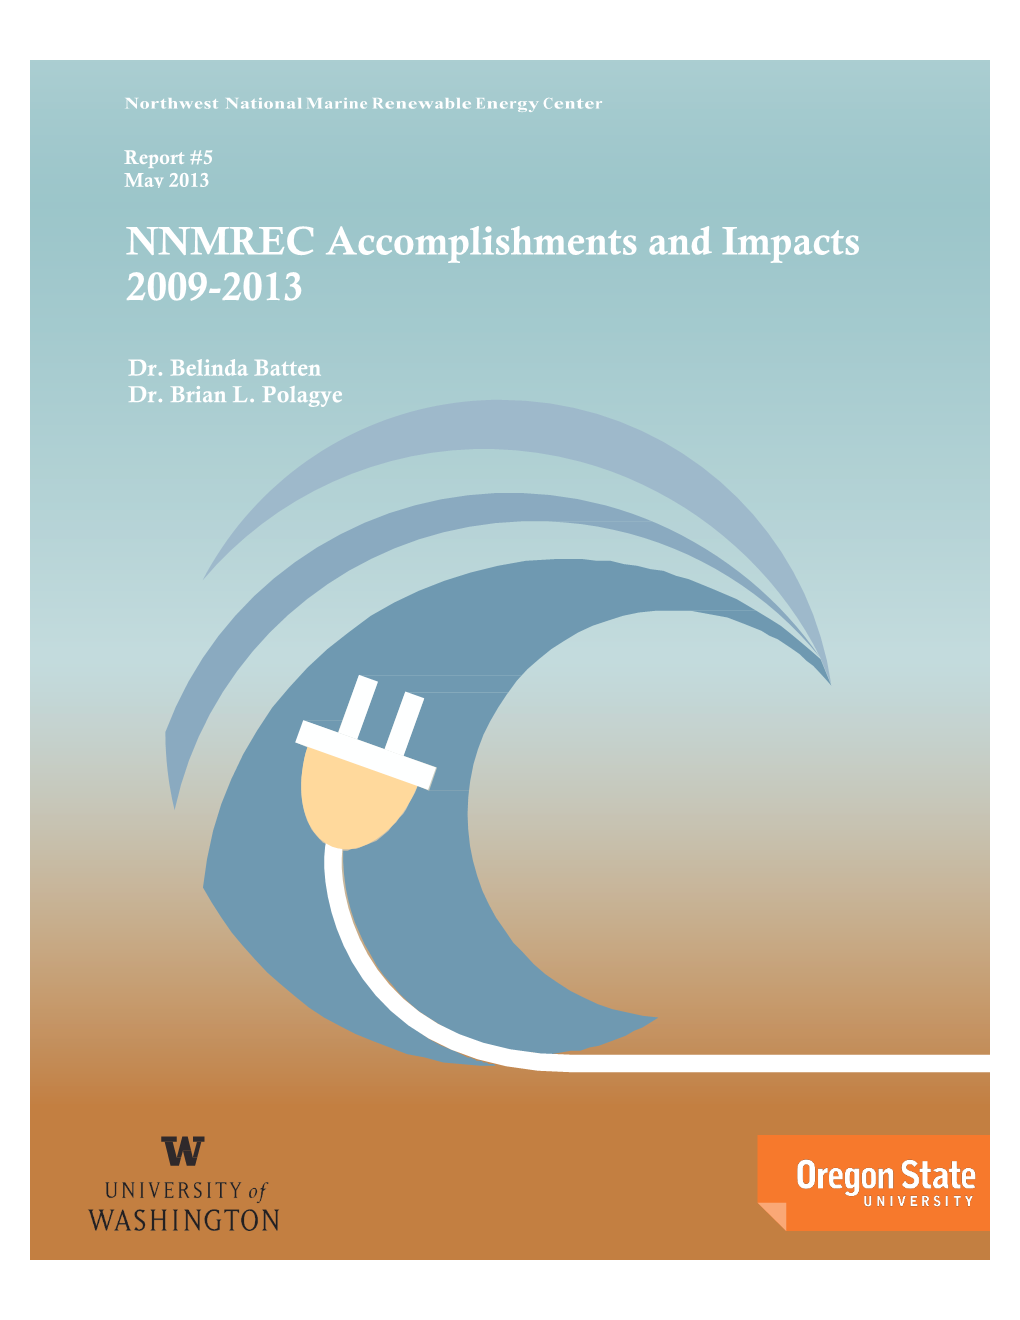 NNMREC Accomplishments and Impacts 2009-2013